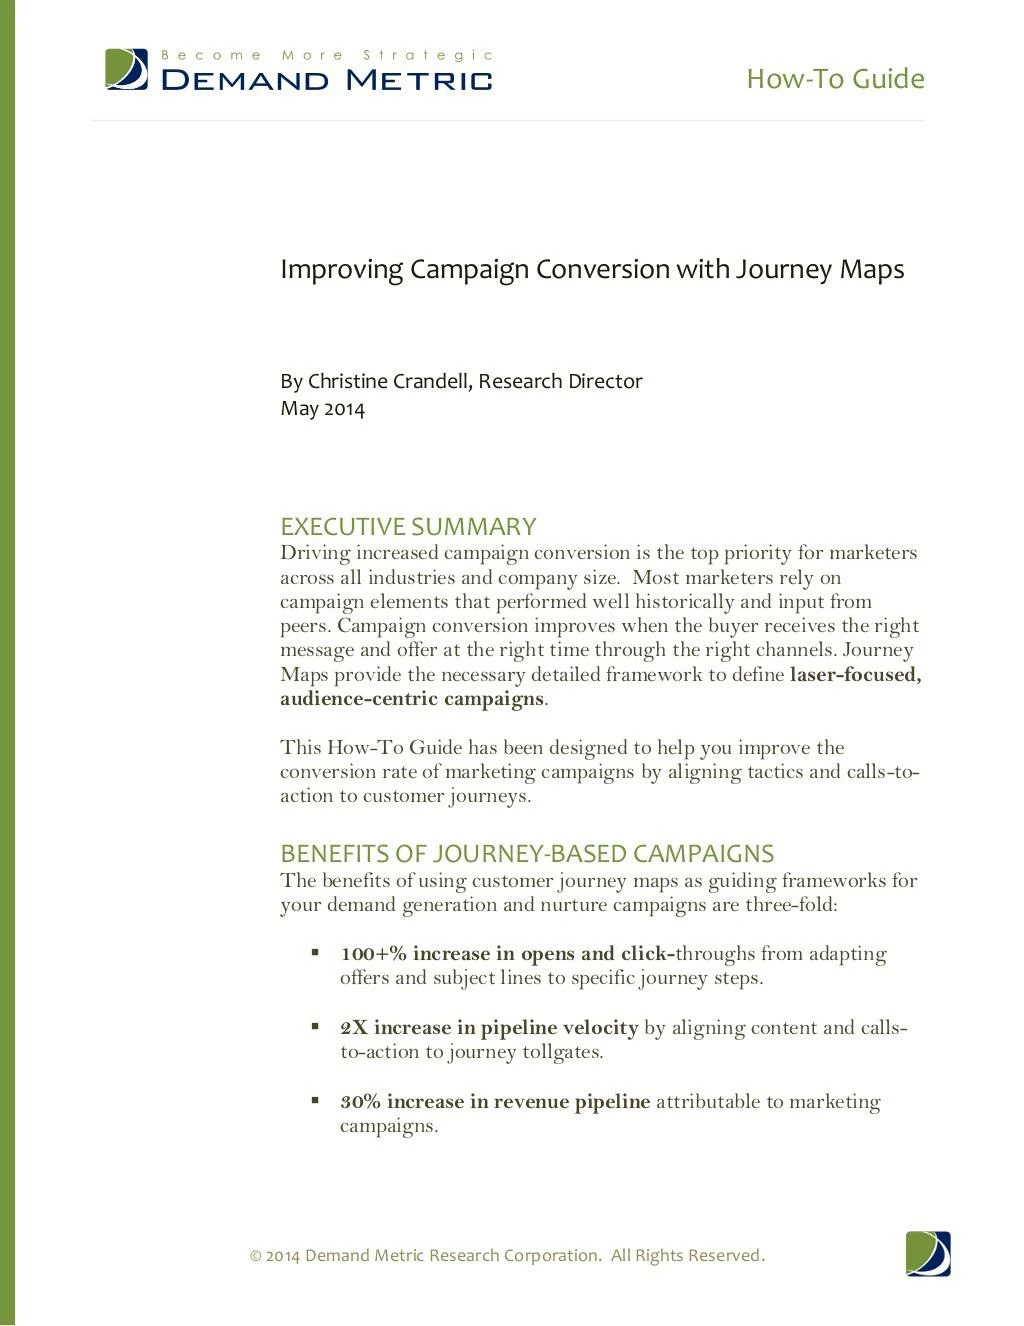 how to guide improving campaign conversion with journey maps